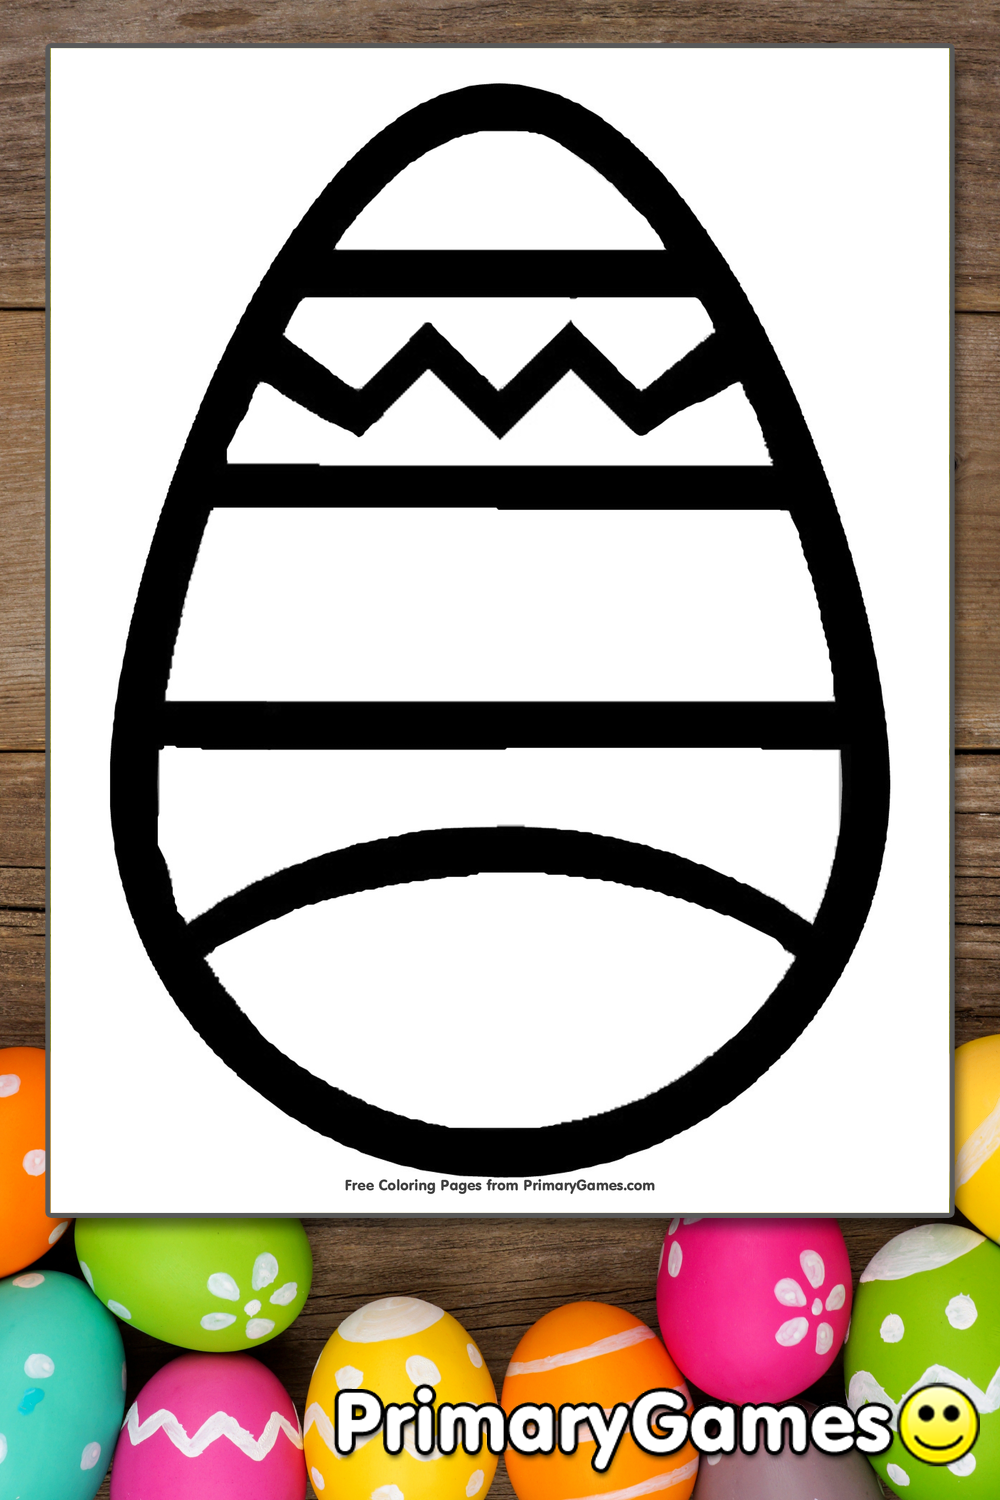 Easter Egg Coloring Page | Printable Easter Coloring eBook - PrimaryGames